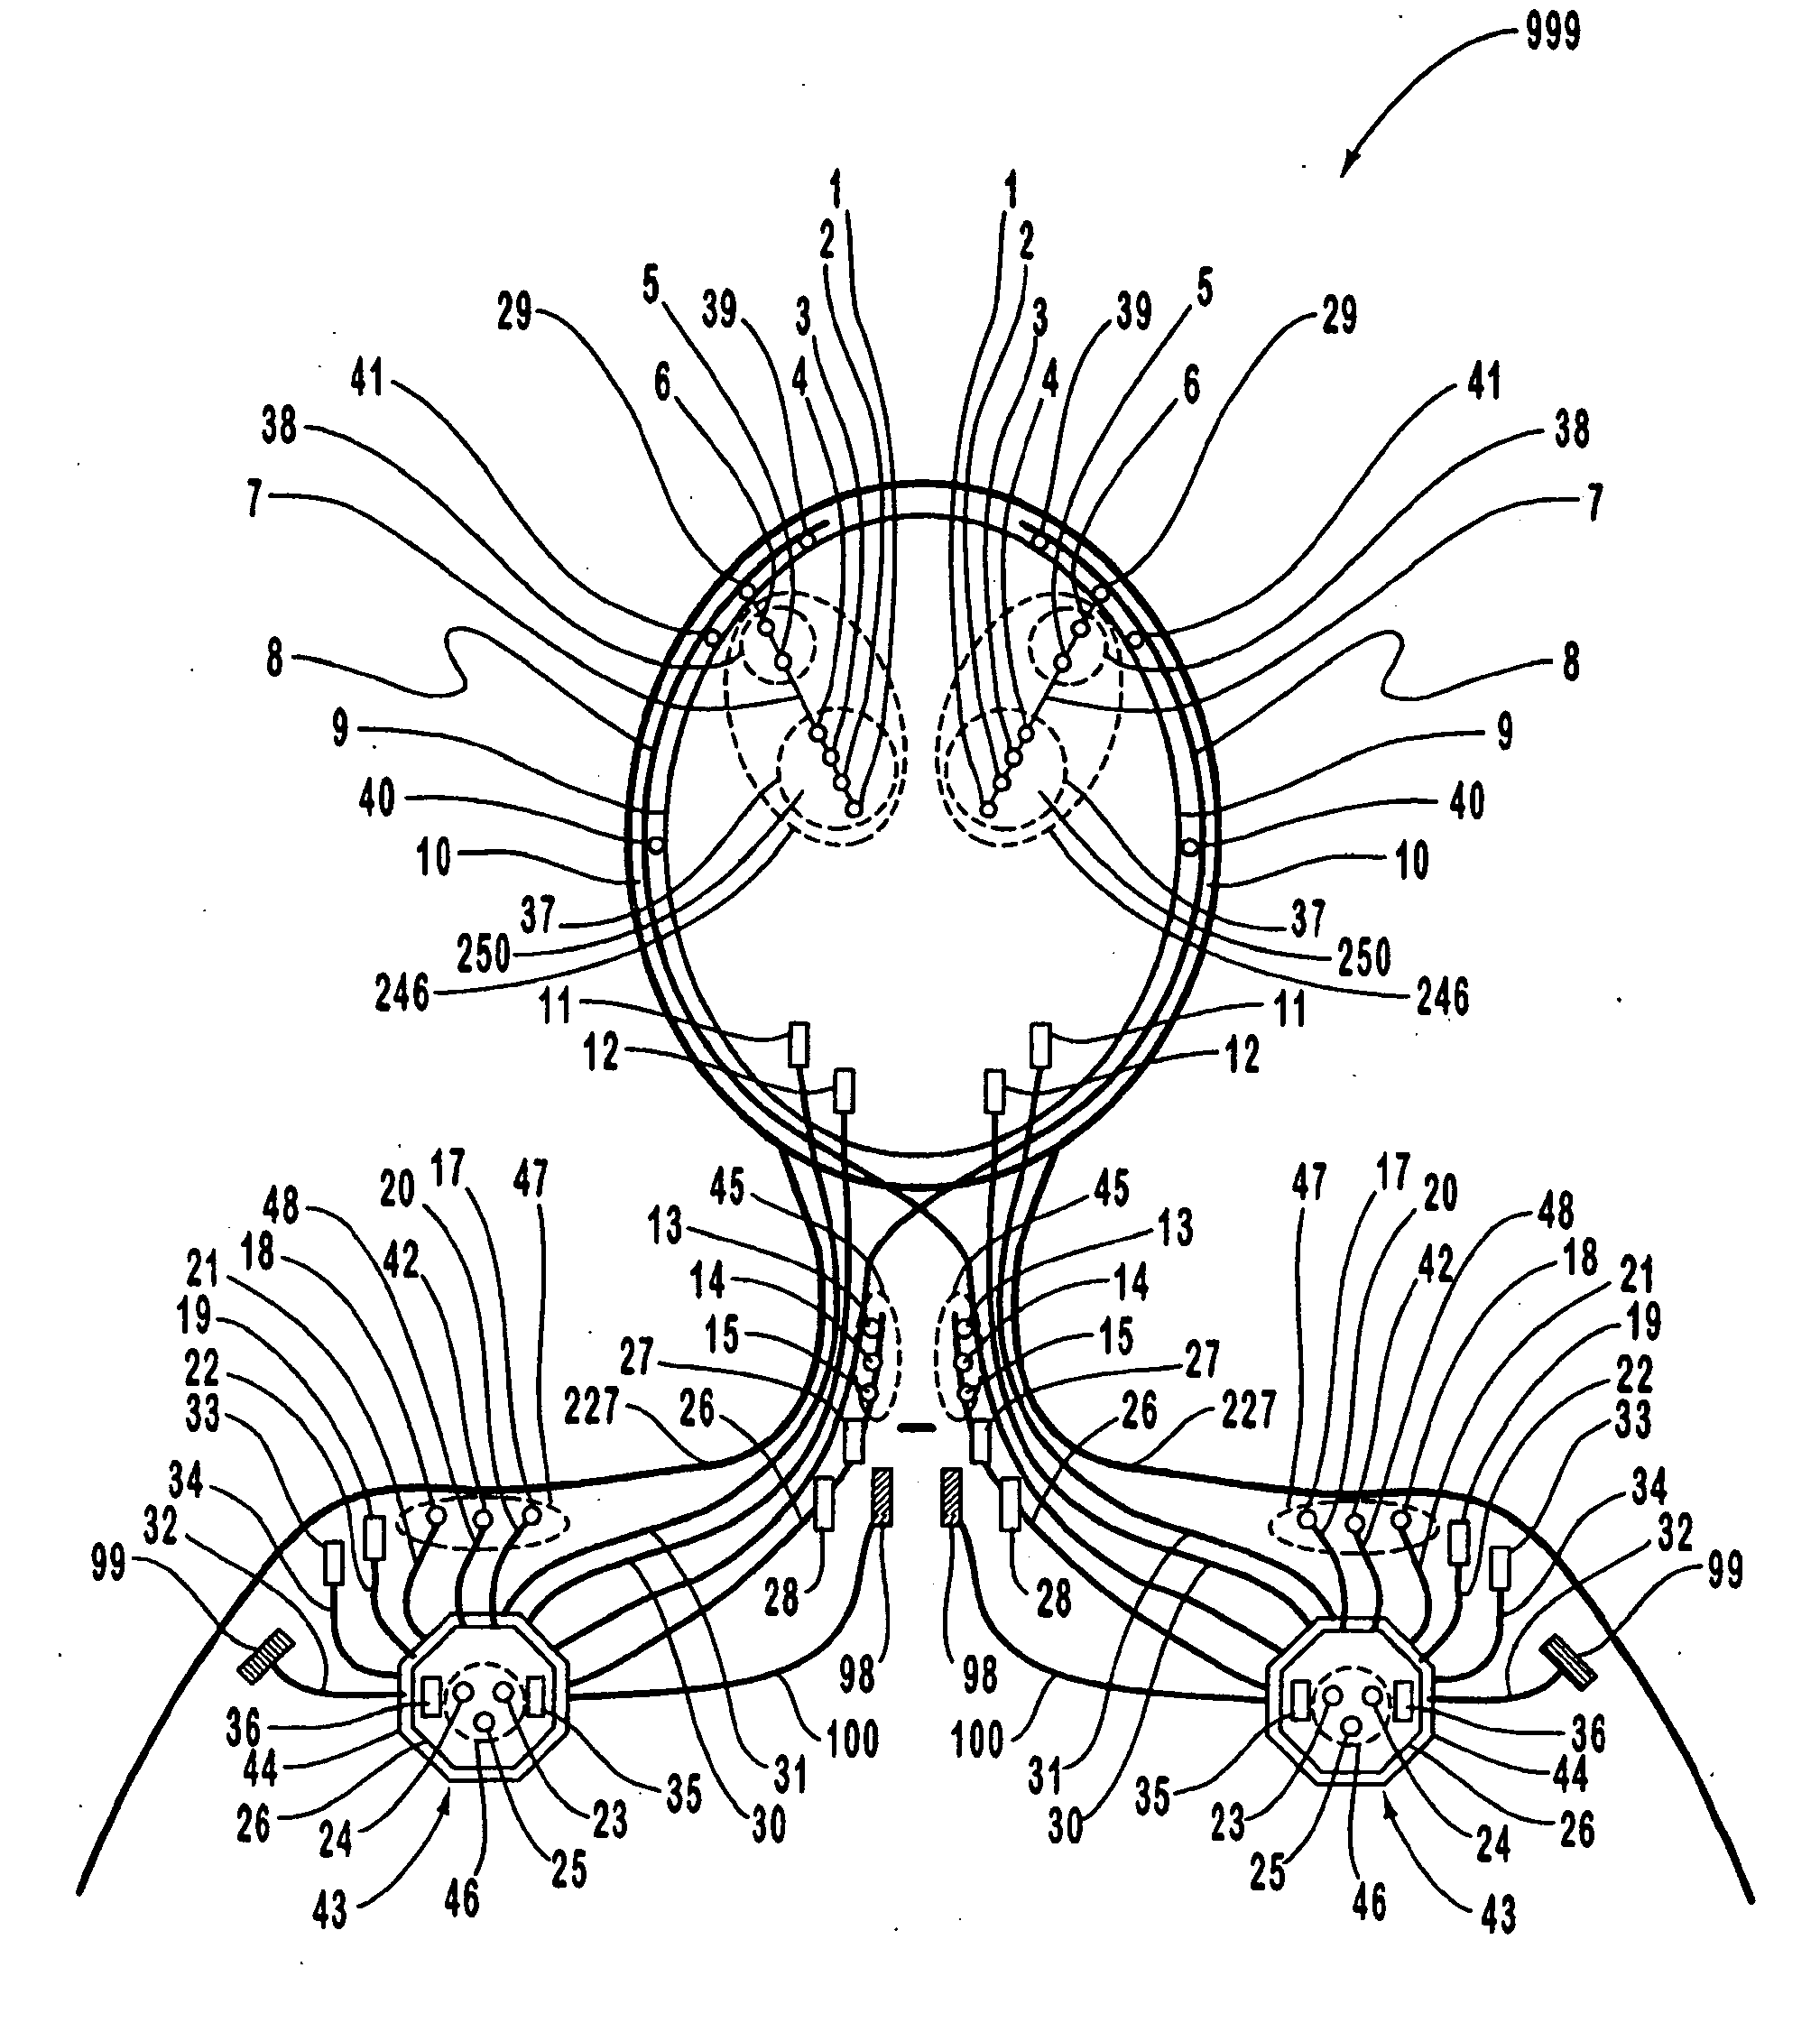 Systems and methods for monitoring a patient's neurological disease state